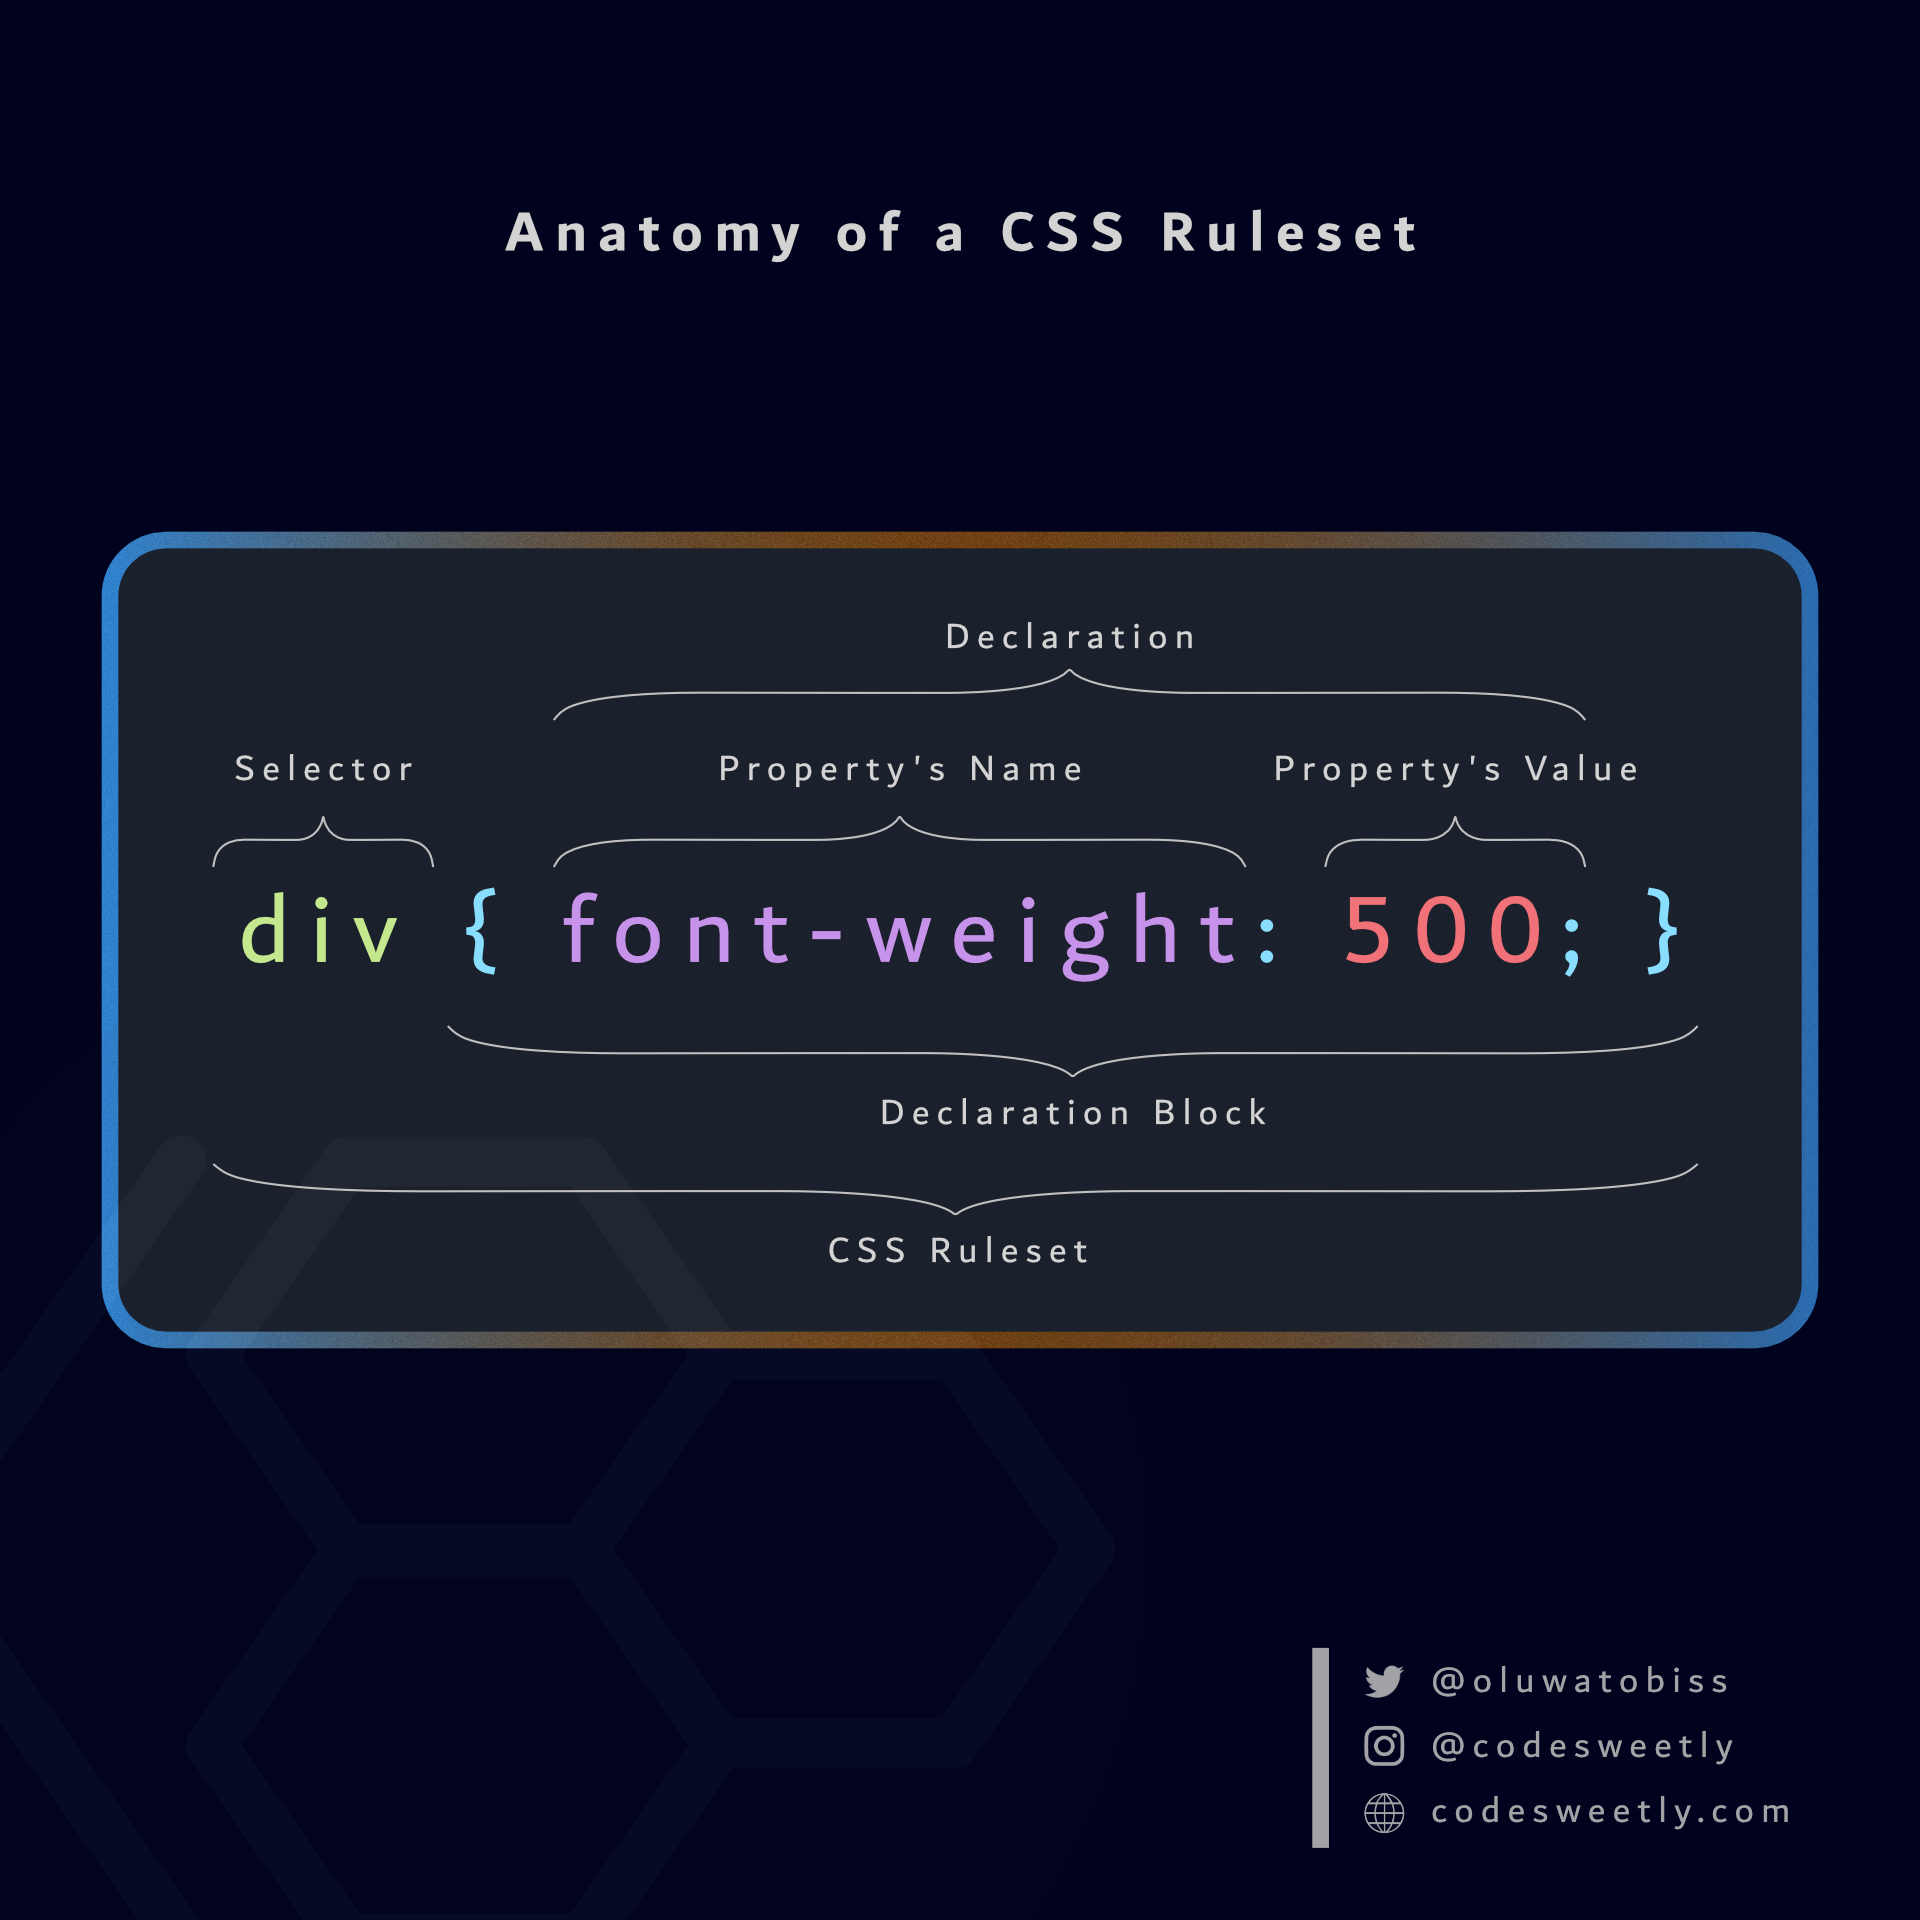 Anatomy of a CSS ruleset